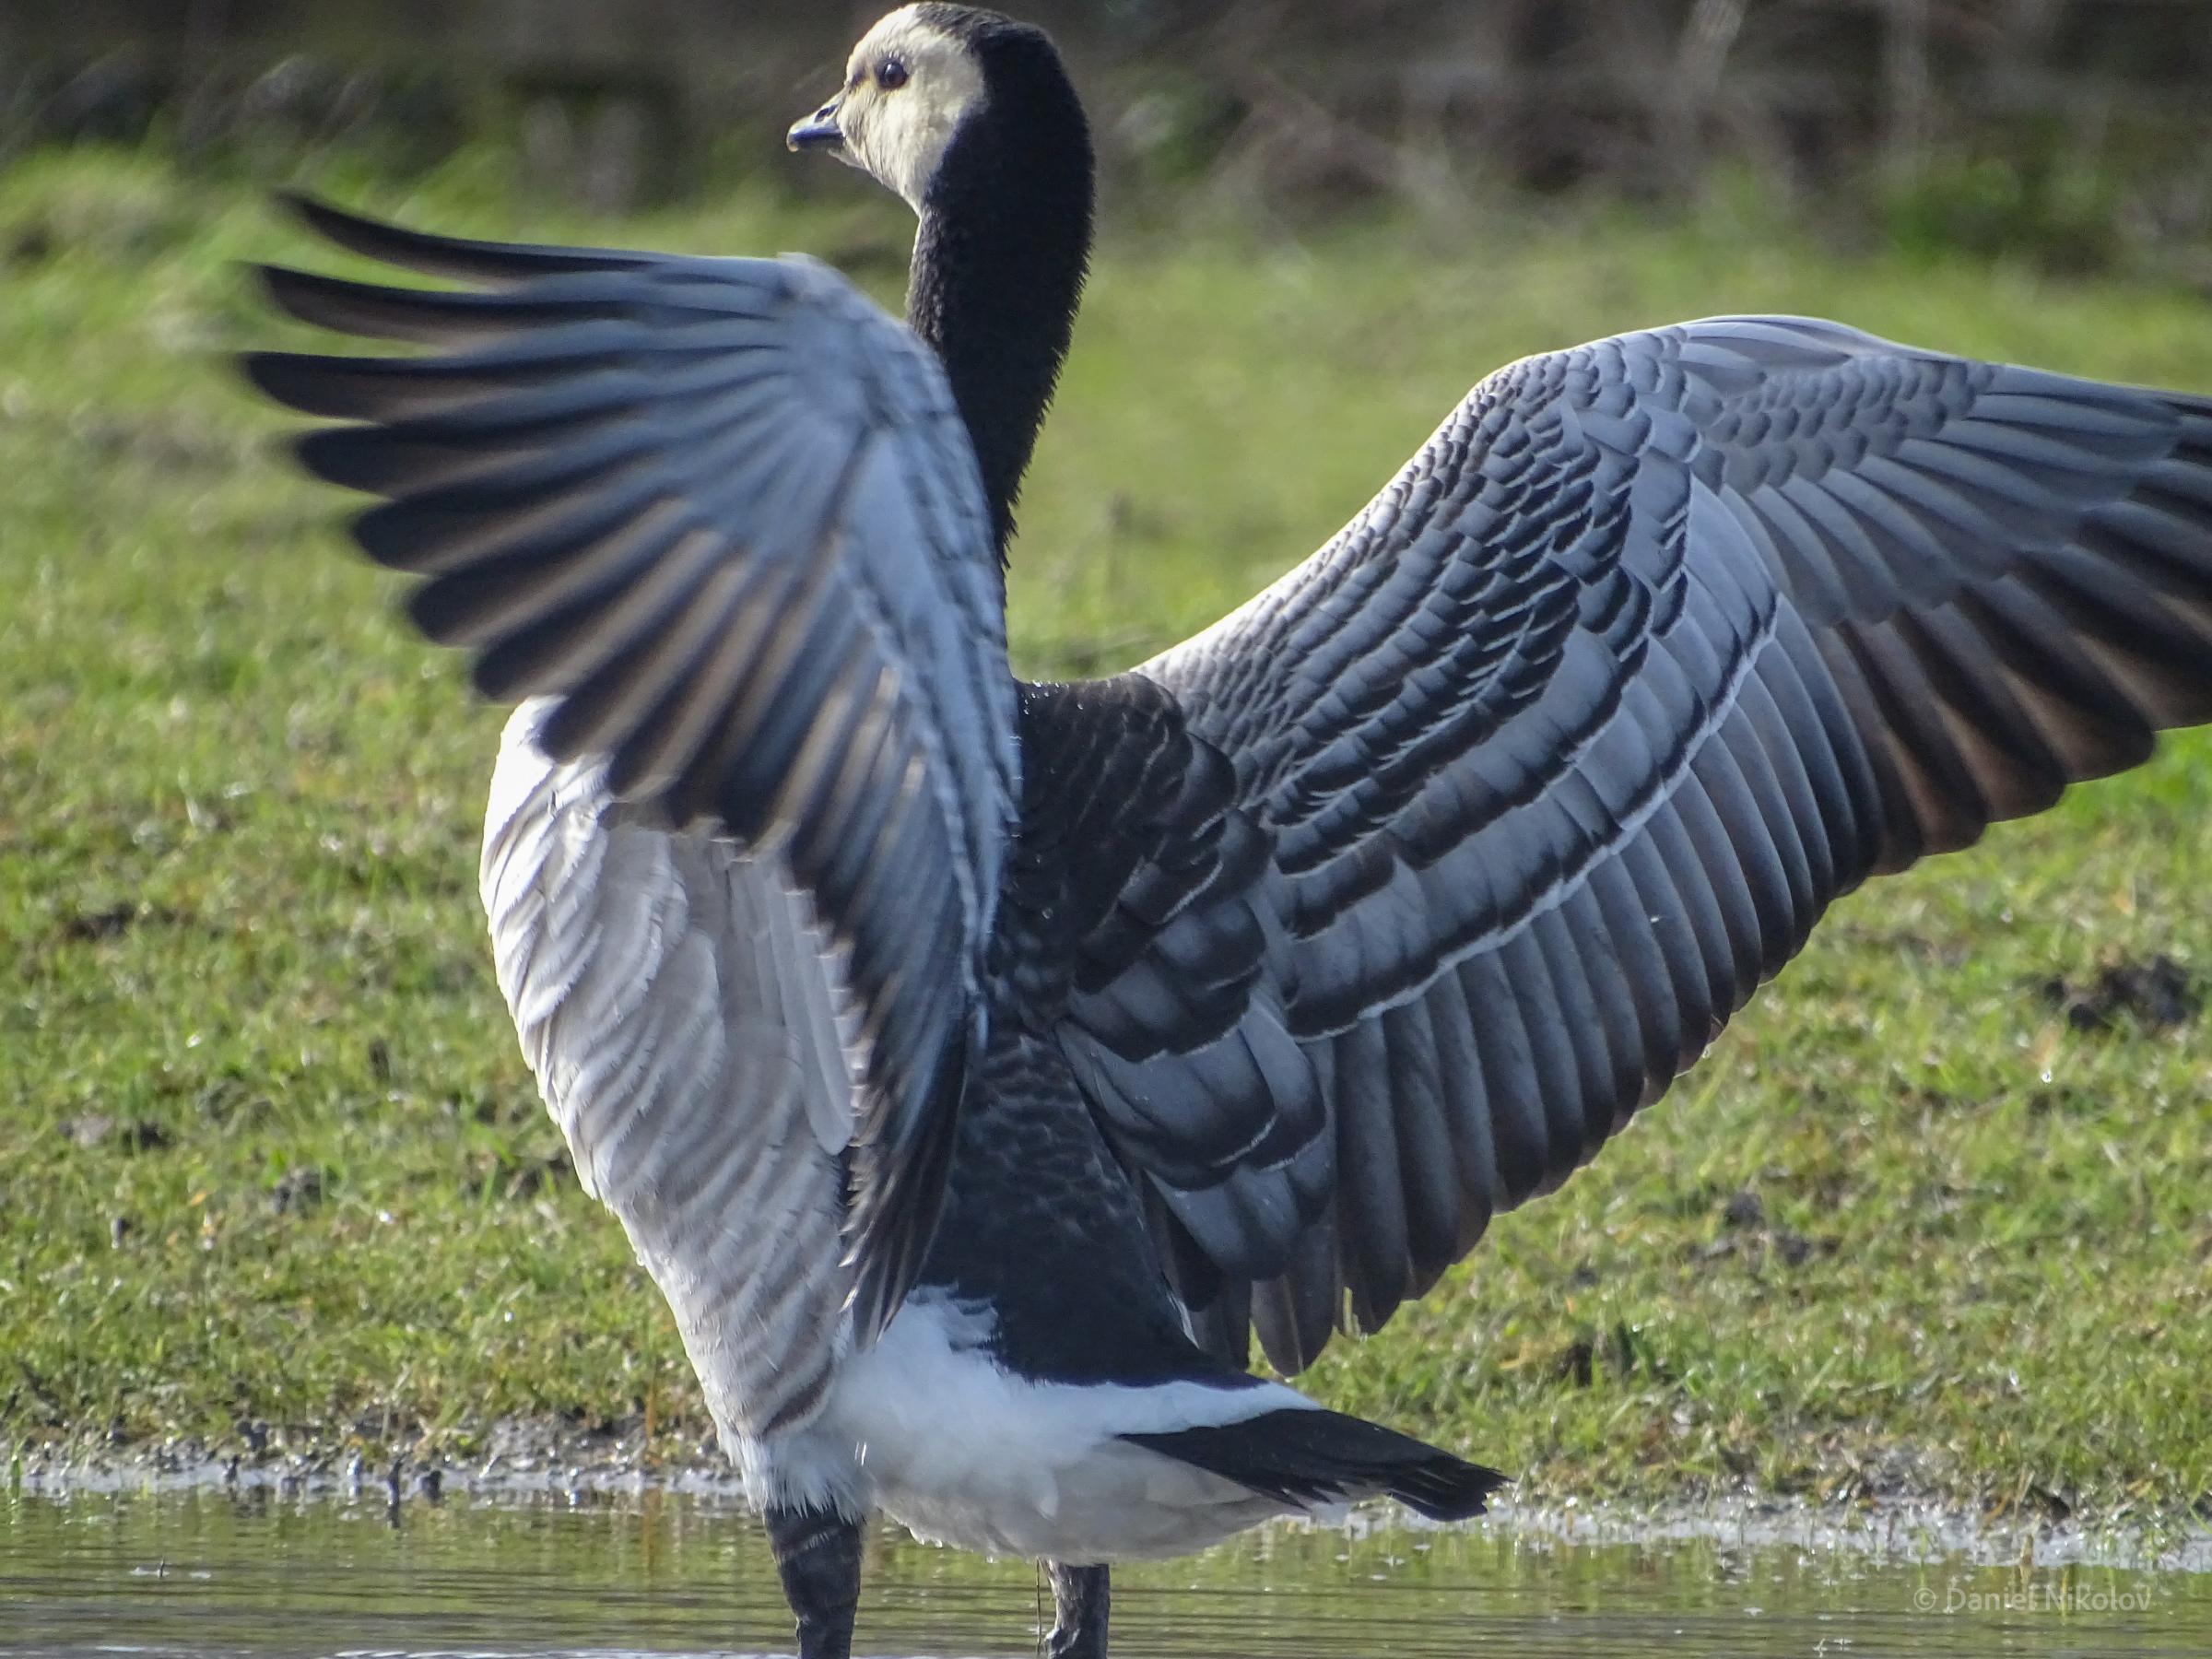 Rare barnacle goose spotted in Abbey Woods Crossness Nature Reserve. Photo - Daniel Nikolov